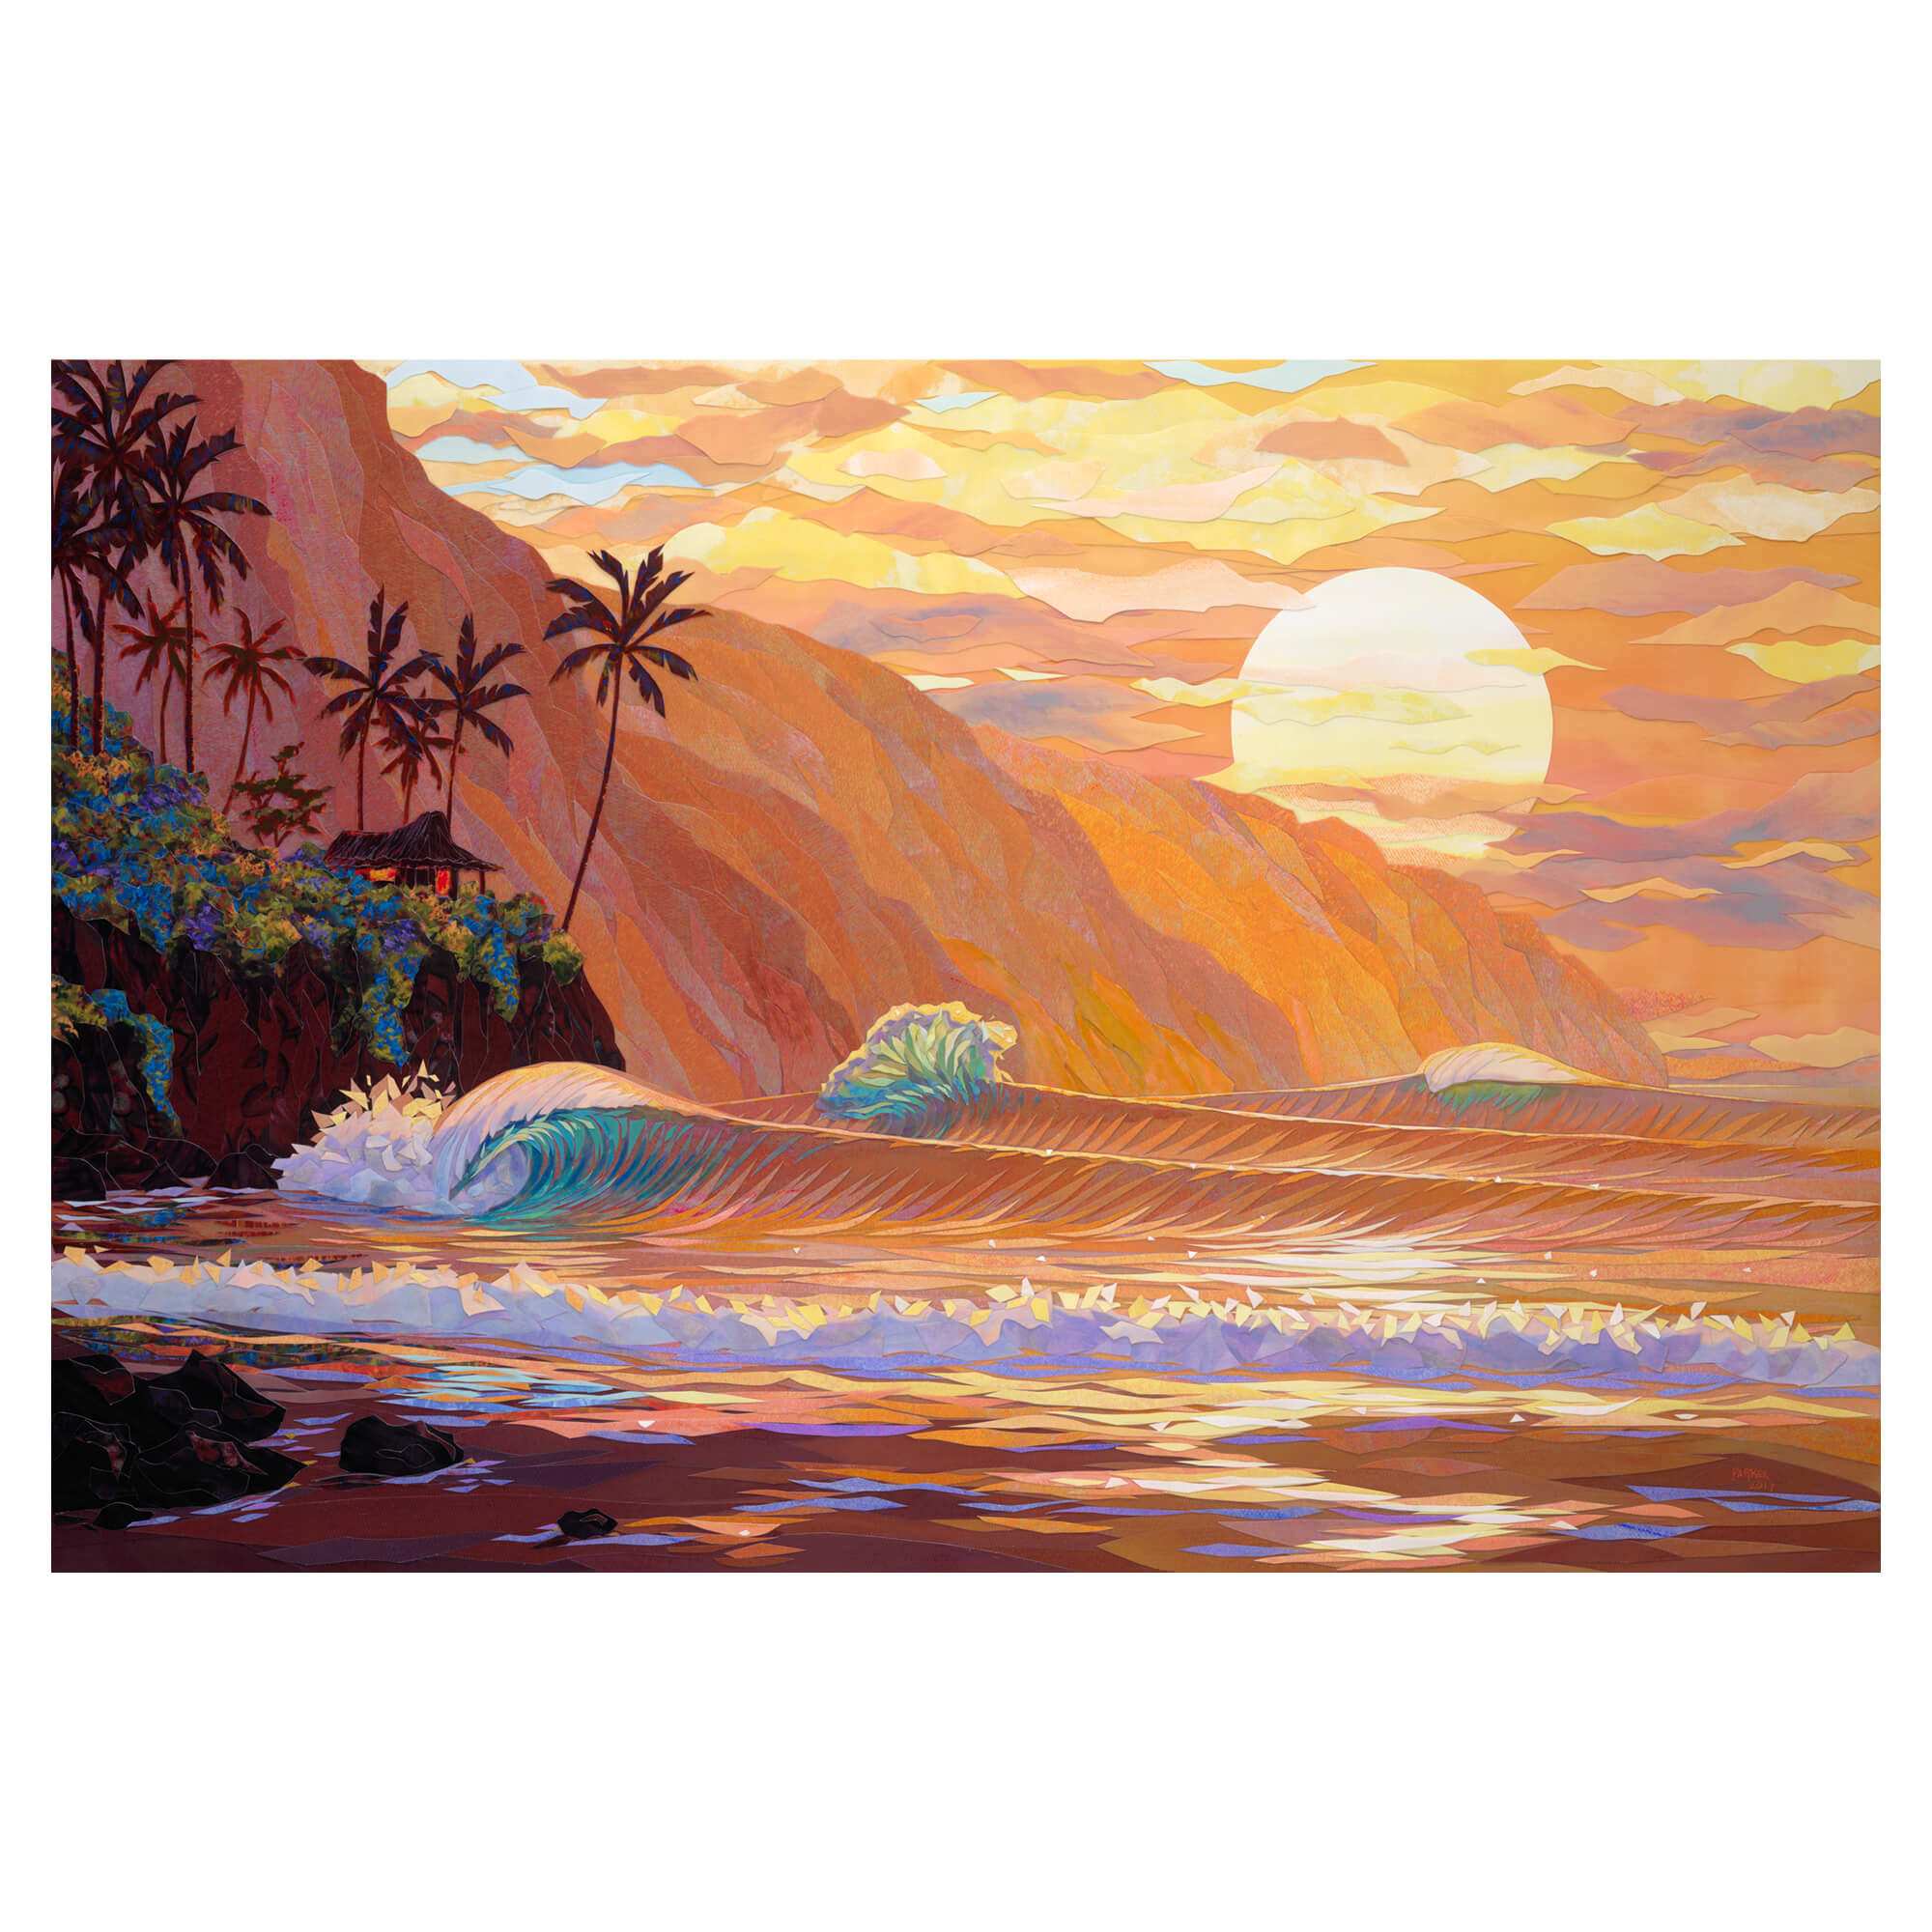 A canvas giclée art print featuring a collage of a sunset view of the ocean as seen from a tropical beach in Hawaii by Hawaii artist Patrick Parker